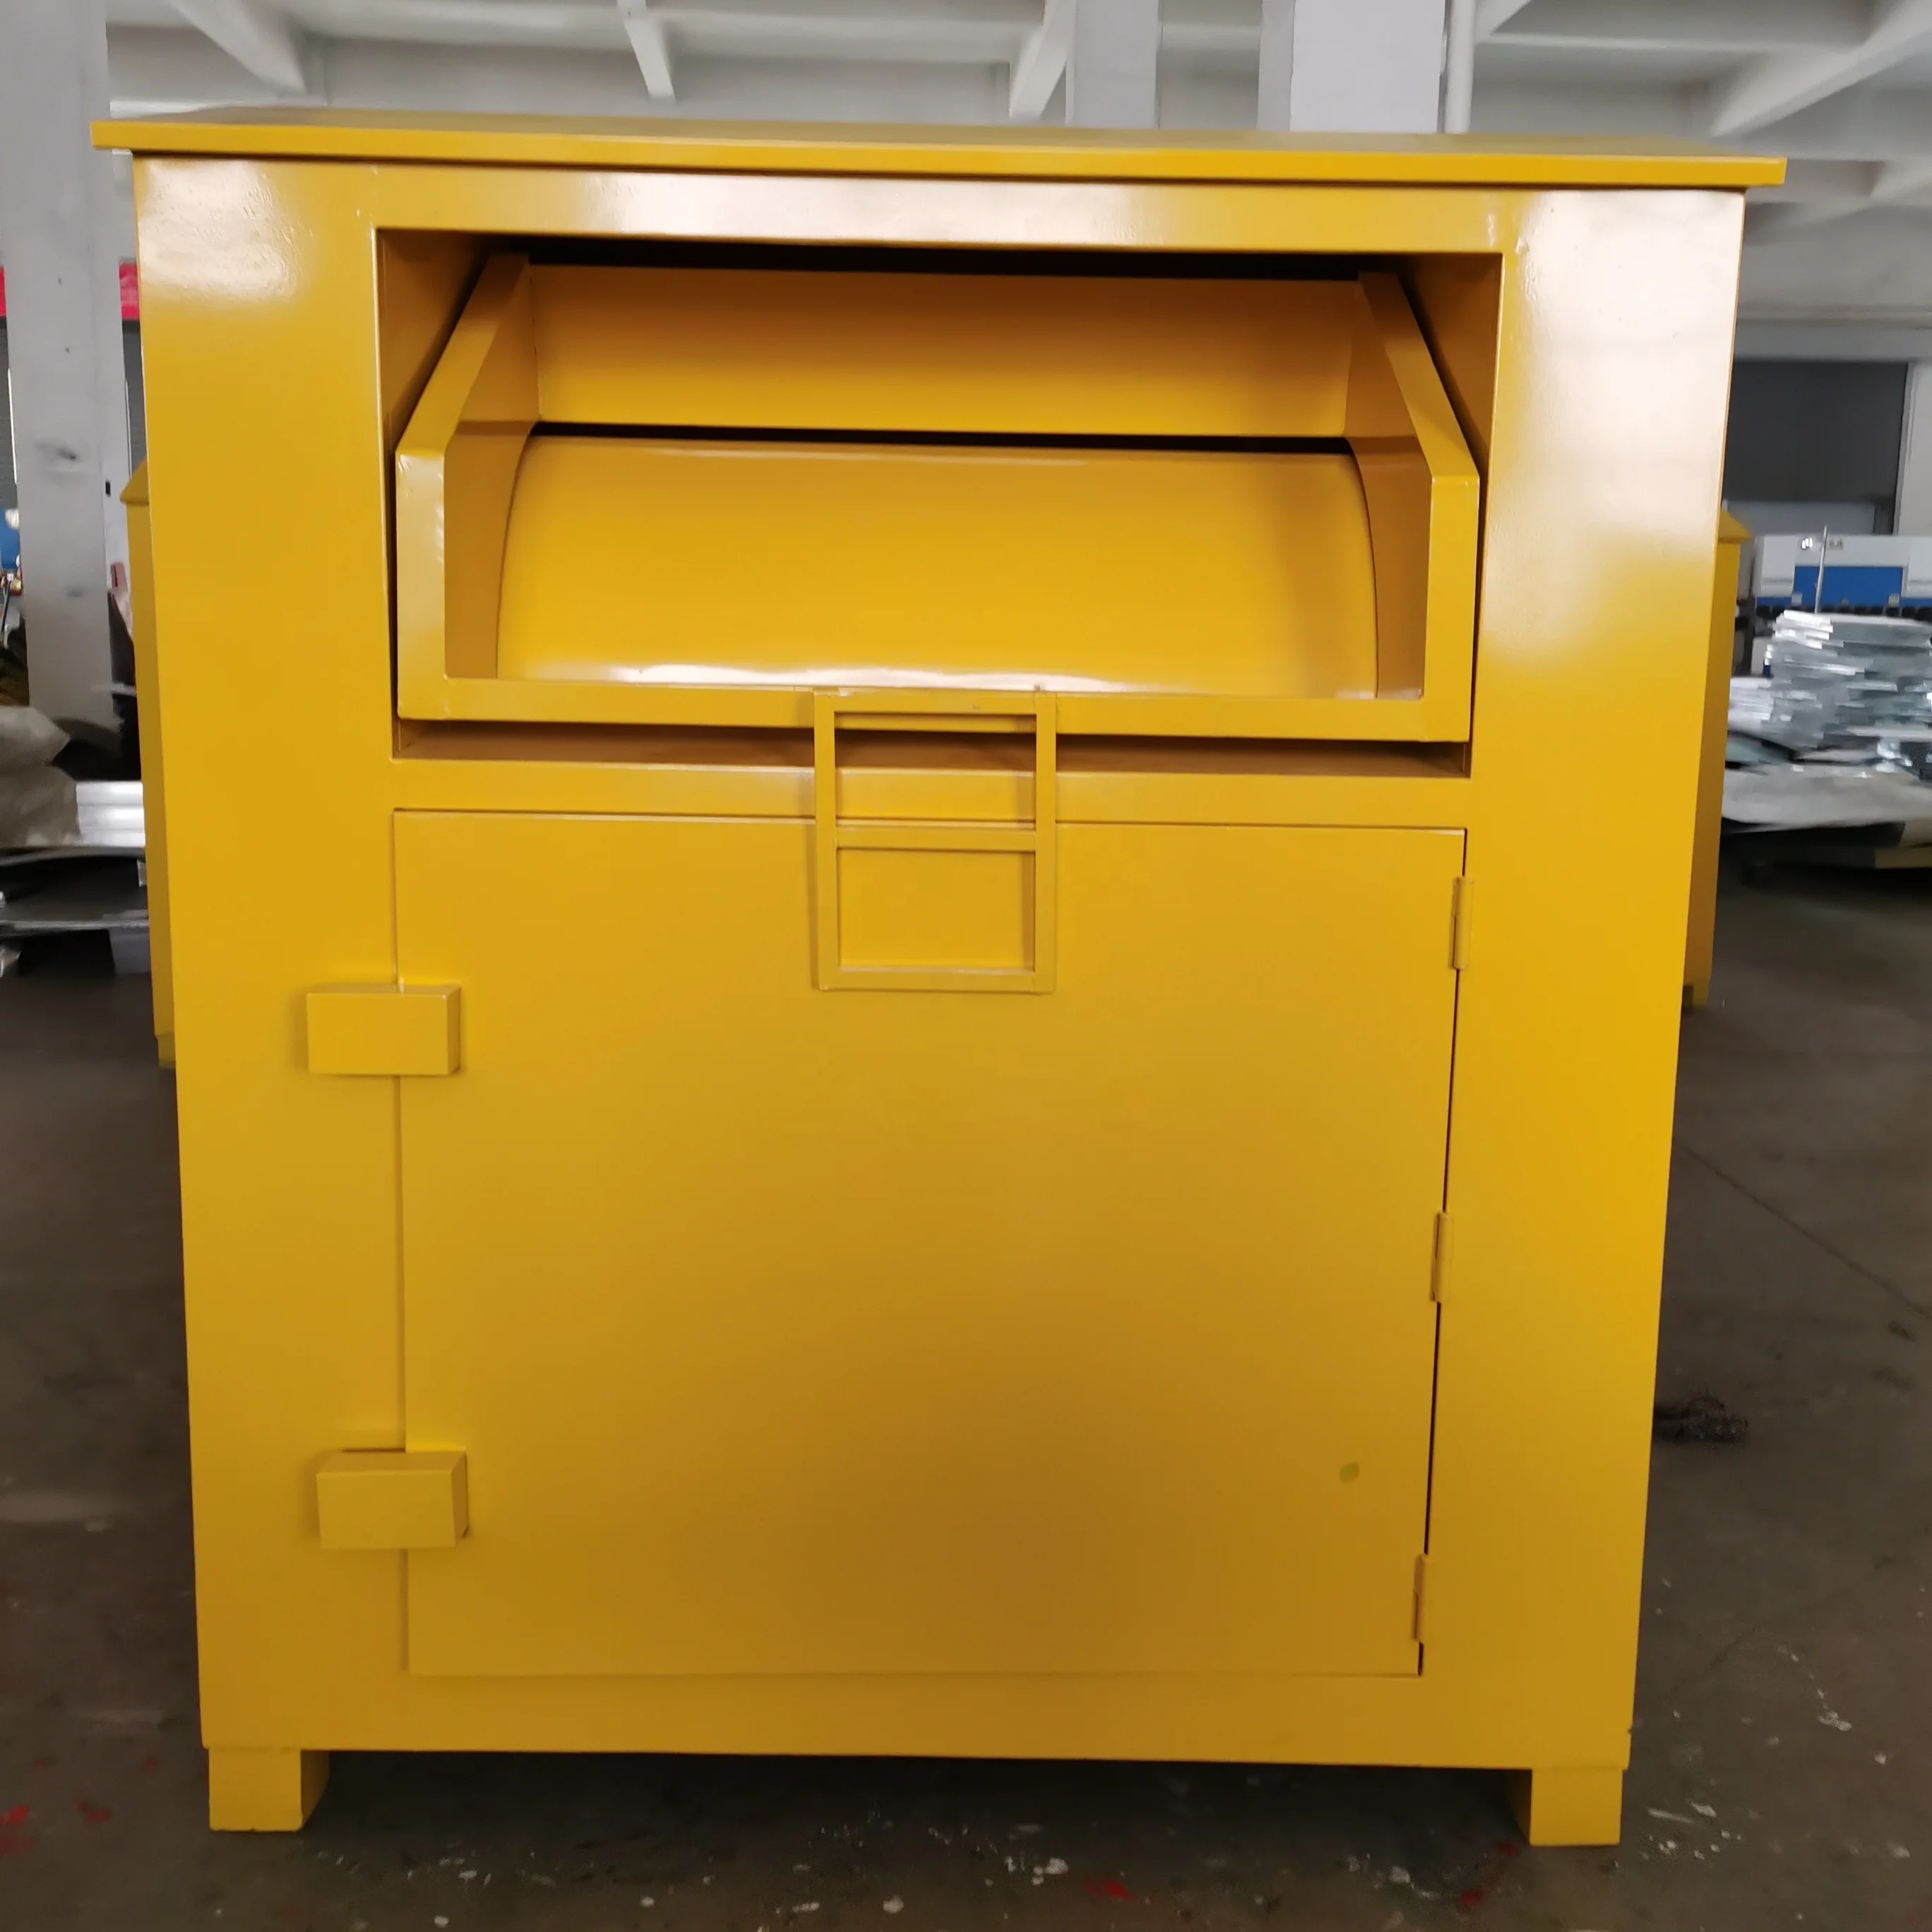 

Hotsale Cheap Custom Size Recycled Boxes Clothes Donation Banks Large window Donation bin, Customer's color